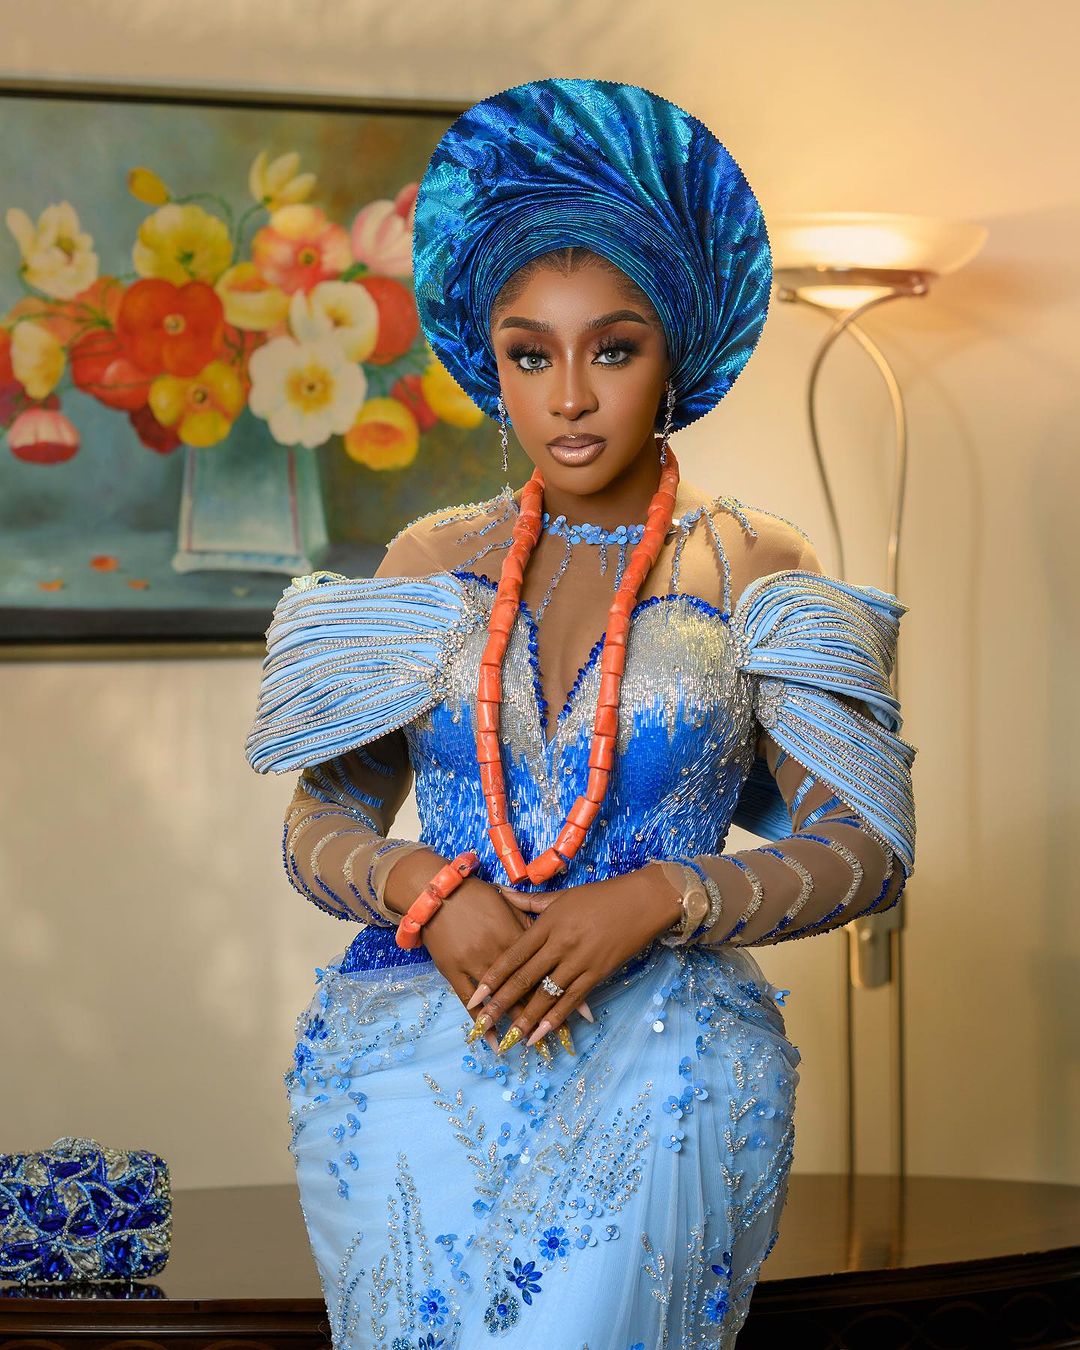 Brides-To-Be! Ini Edo is Serving Type Hints For Premium Bridal Class